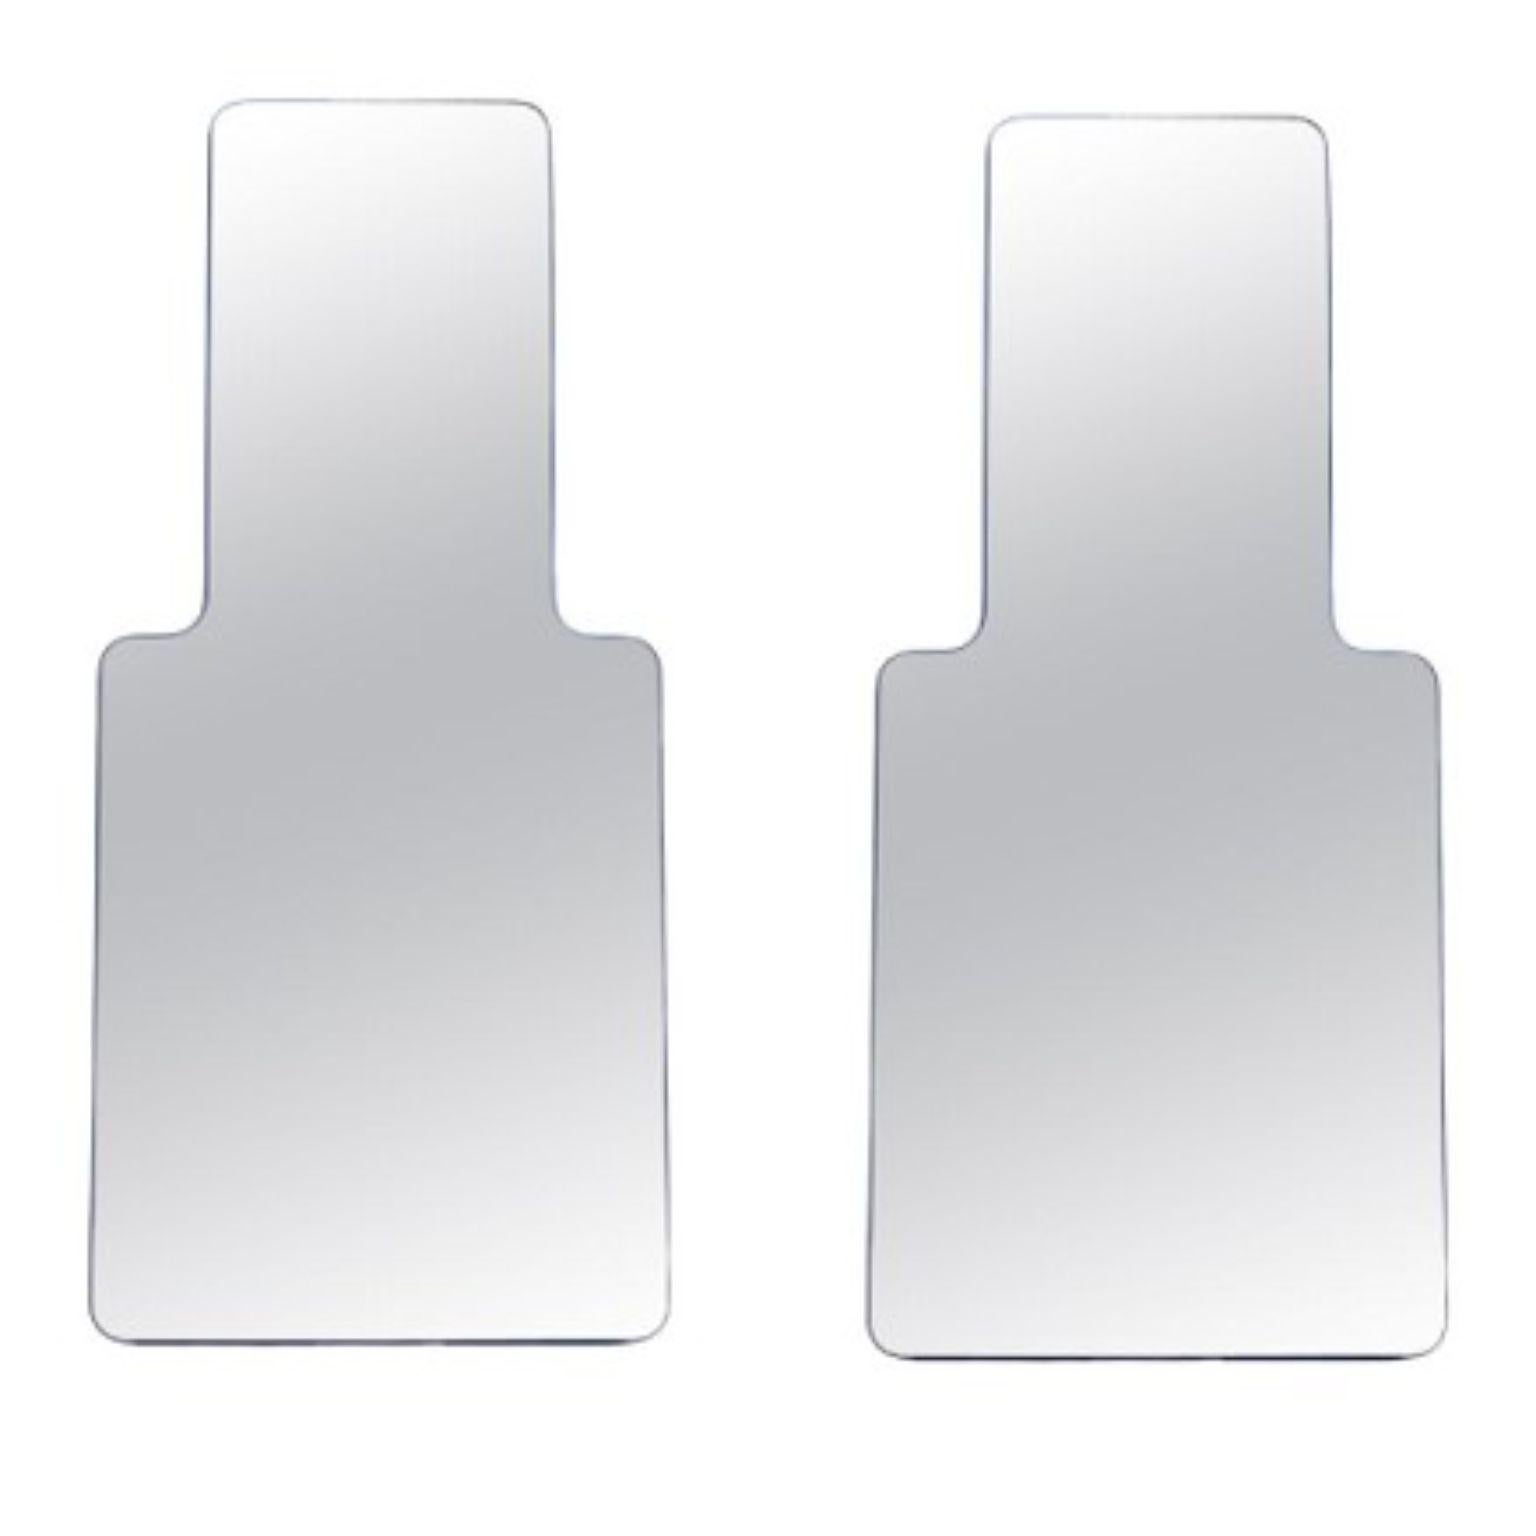 Set of 2 loveself 03 mirrors by Oito
Dimensions: D 70 x W 4 x H 180 cm
Materials:Peinting mdf, silver glass mirror

LOVESELF is a collection of mirrors created by our team of designers oito design . The mission of our collection is to call